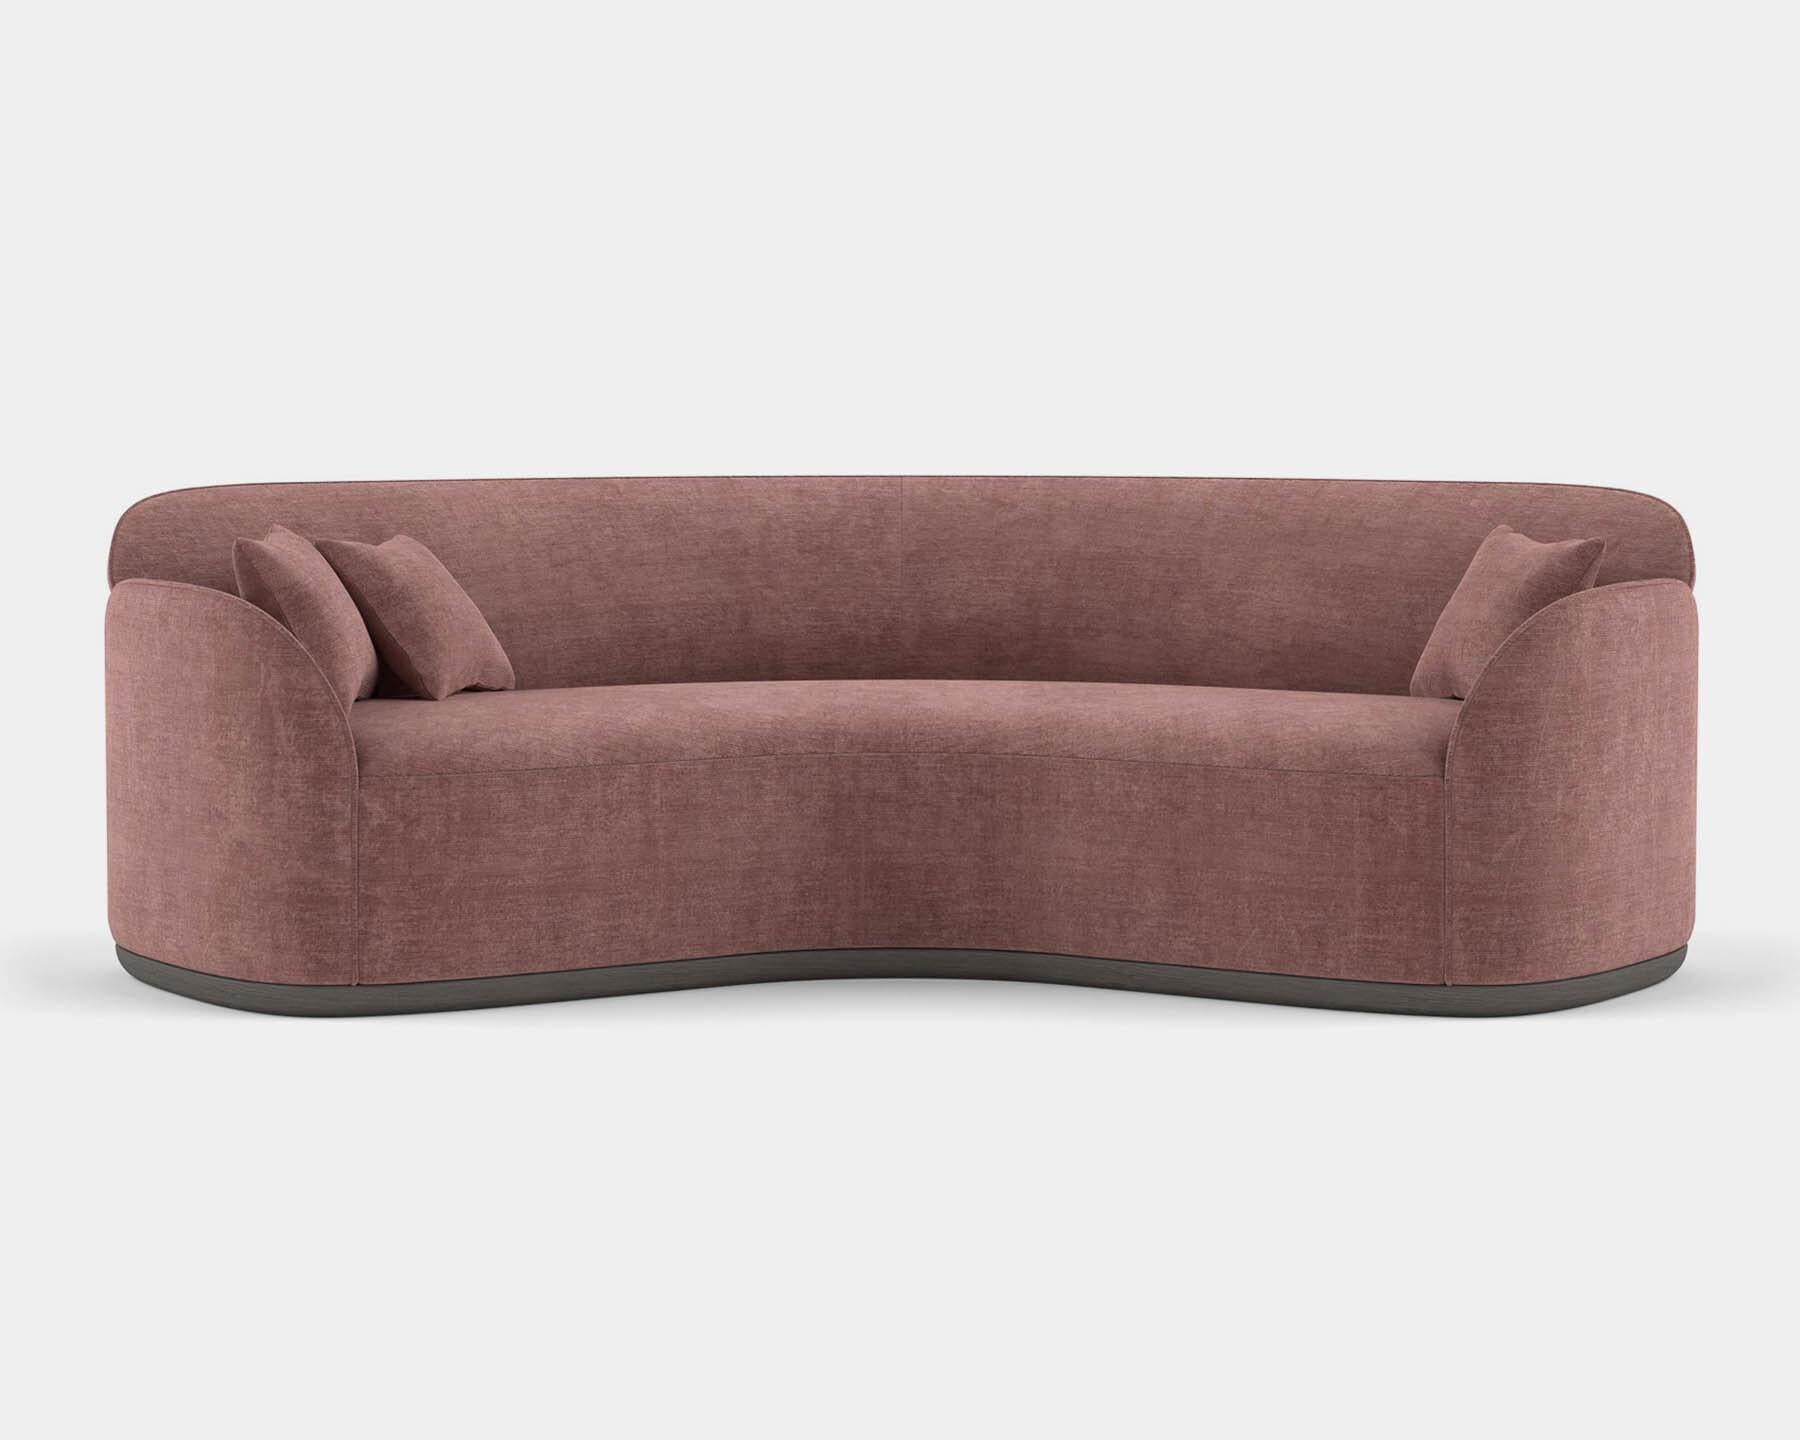 Fabric Contemporary Curved Sofa 'Unio' by Poiat, Chivasso Yang 95 For Sale